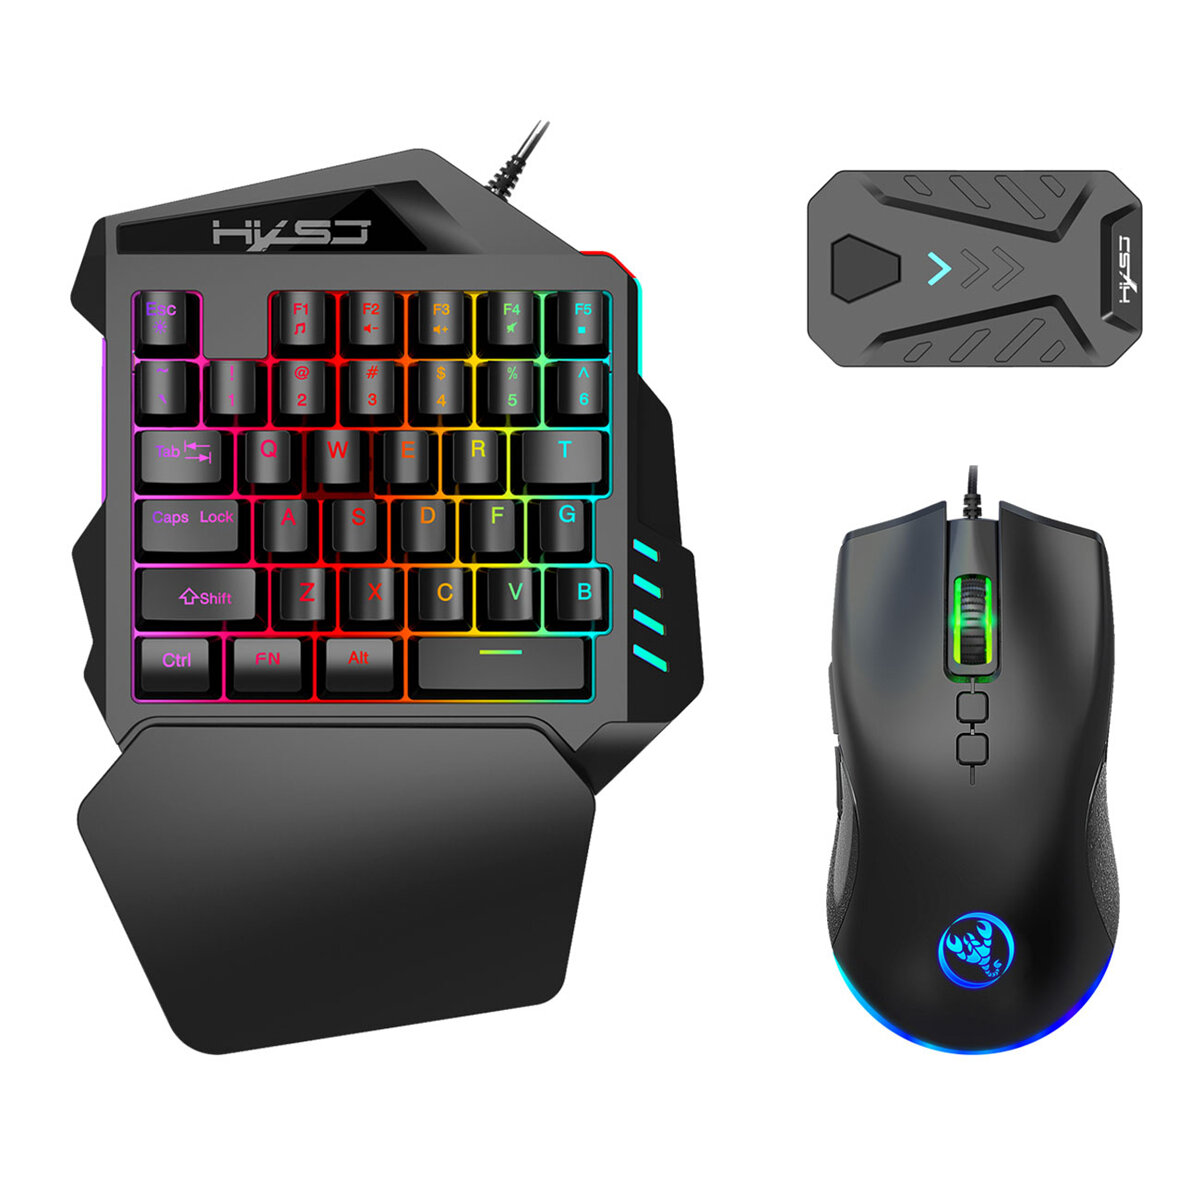 

HXSJ Keyboard+Mouse+Converter Combo 35 Keys Single-hand Gaming Keyboard 6400DPI Wired LED Gaming Mouse Game Console Swit